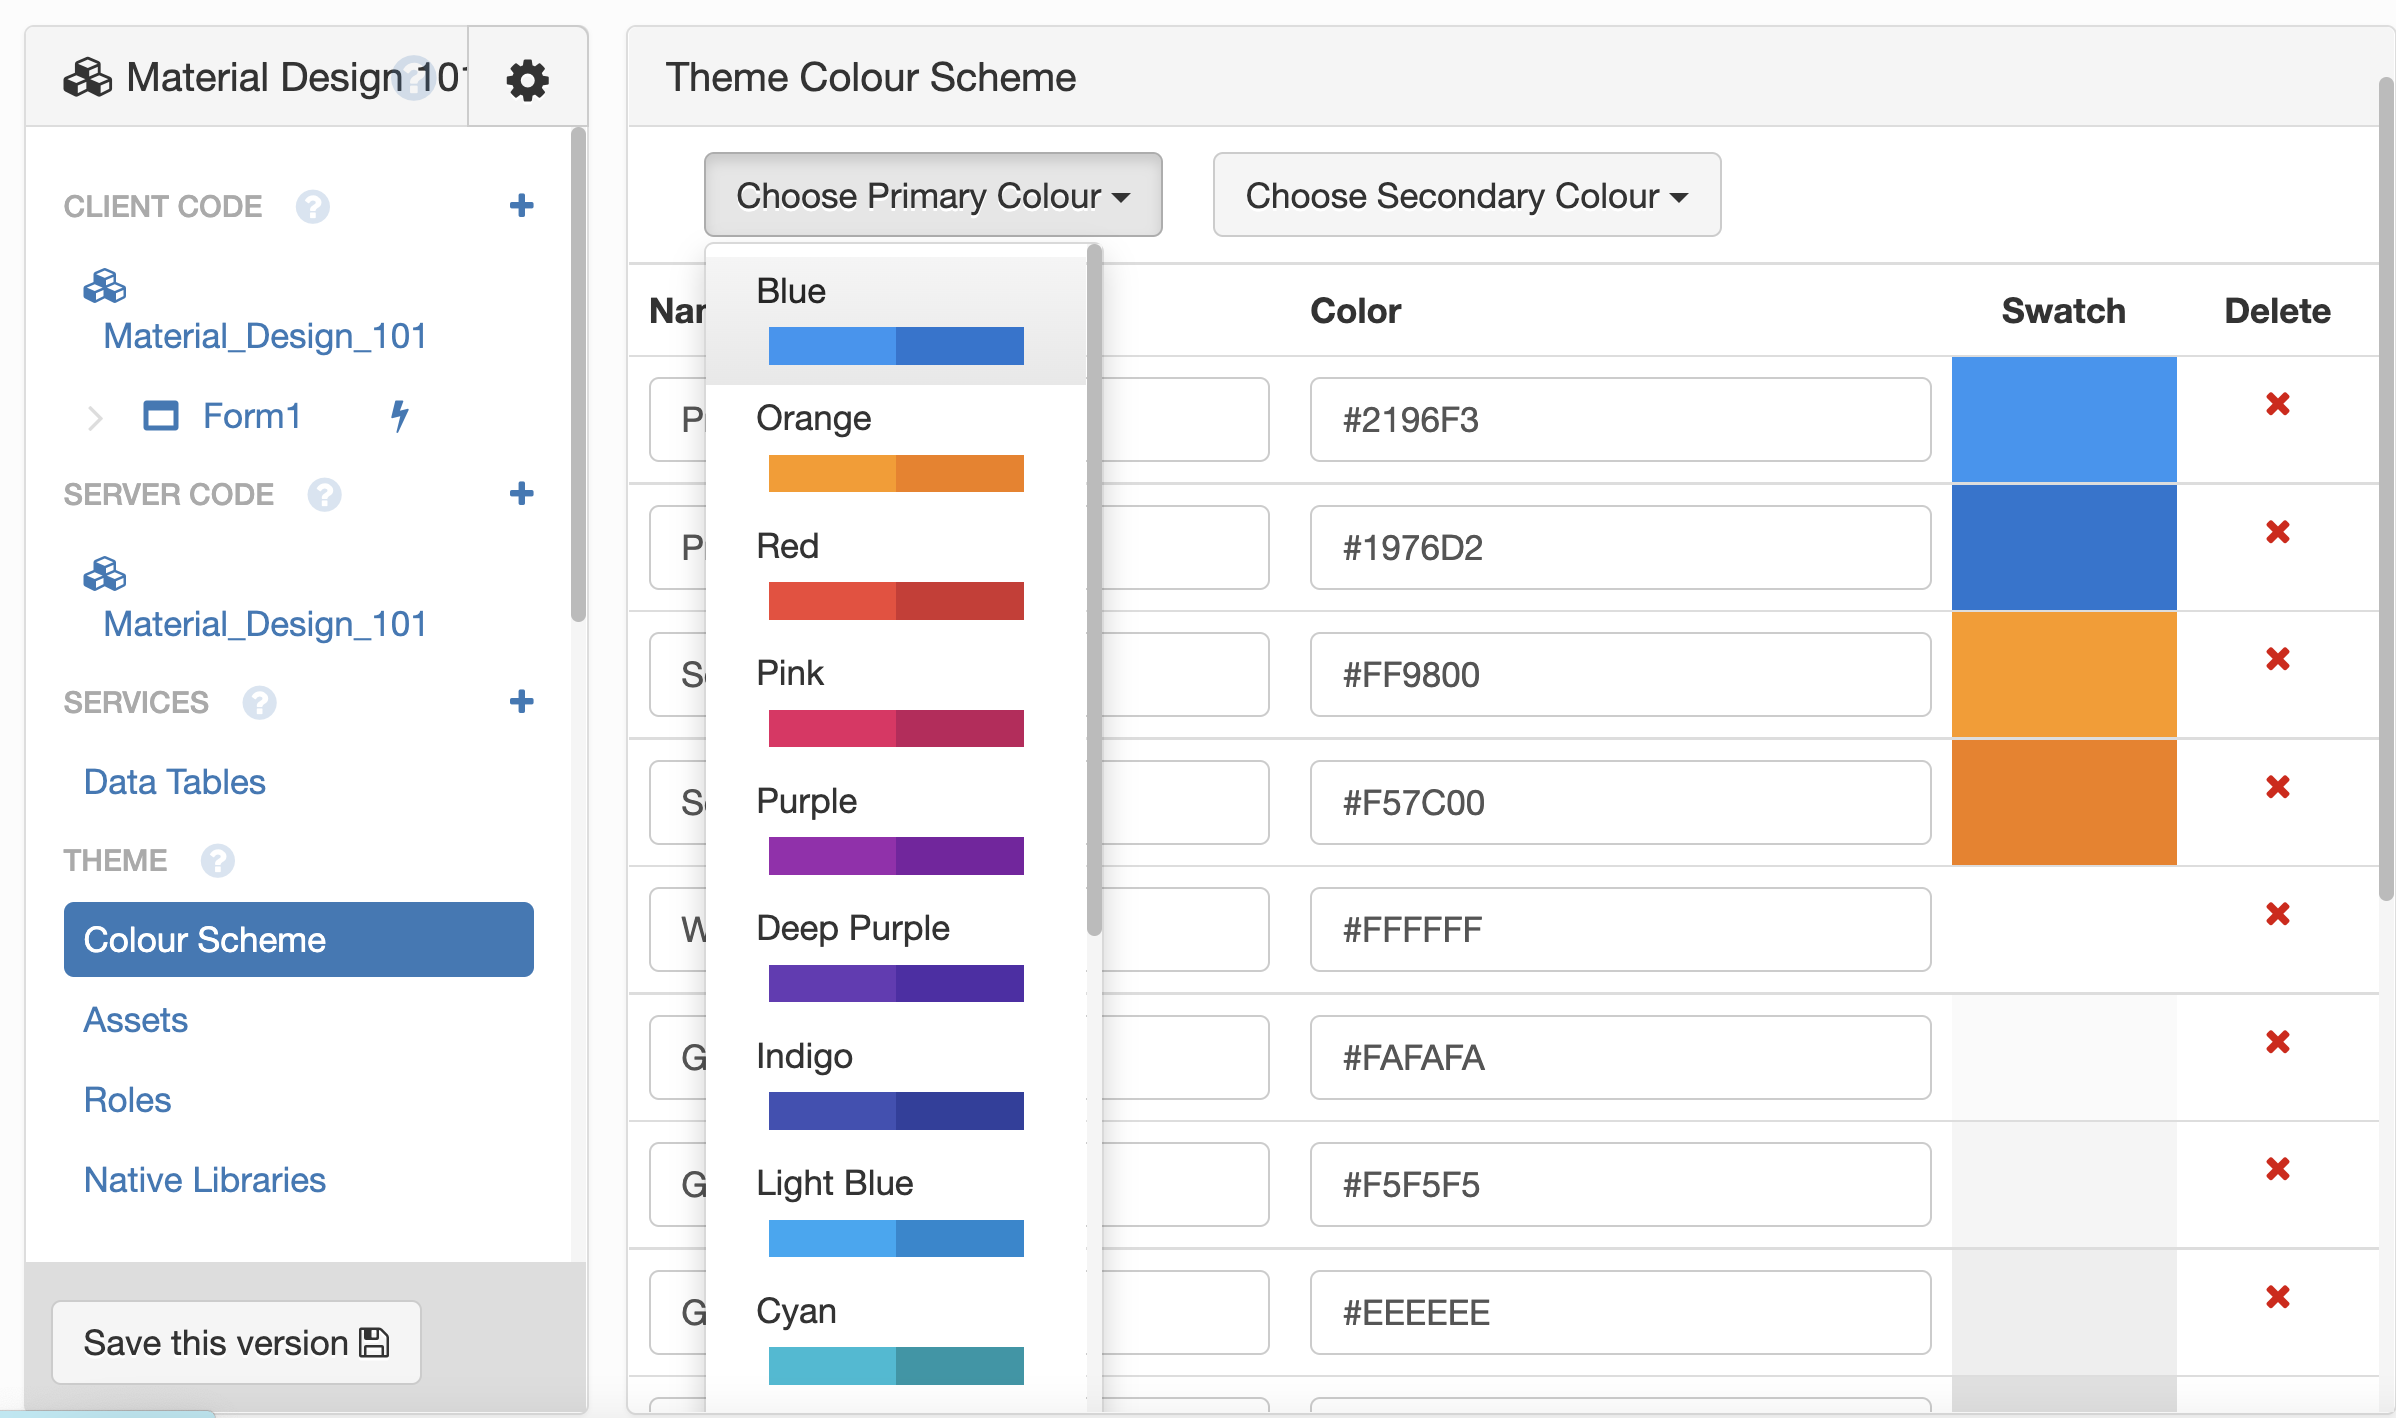 Changing the Primary Colour in a Material Design app